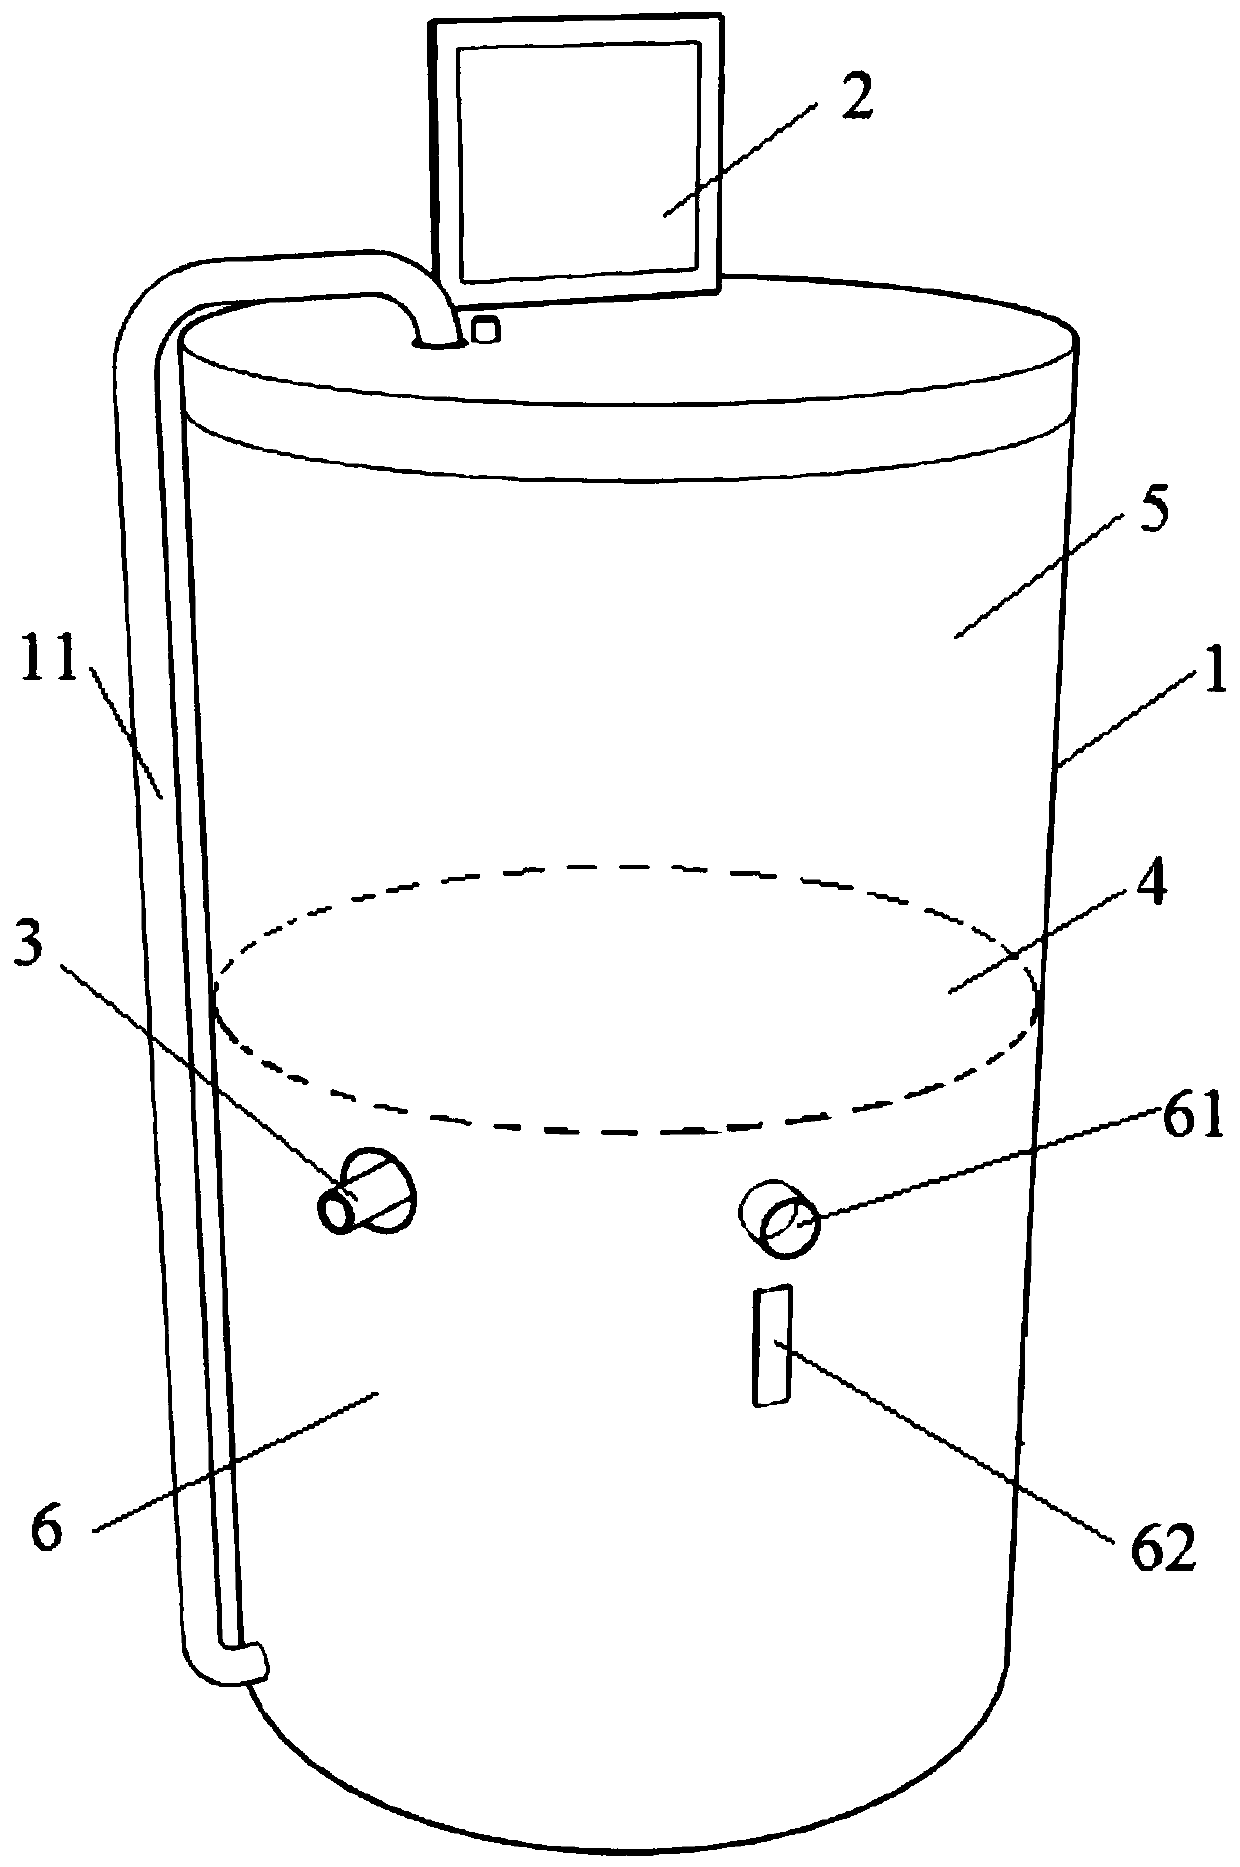 A spirometry device